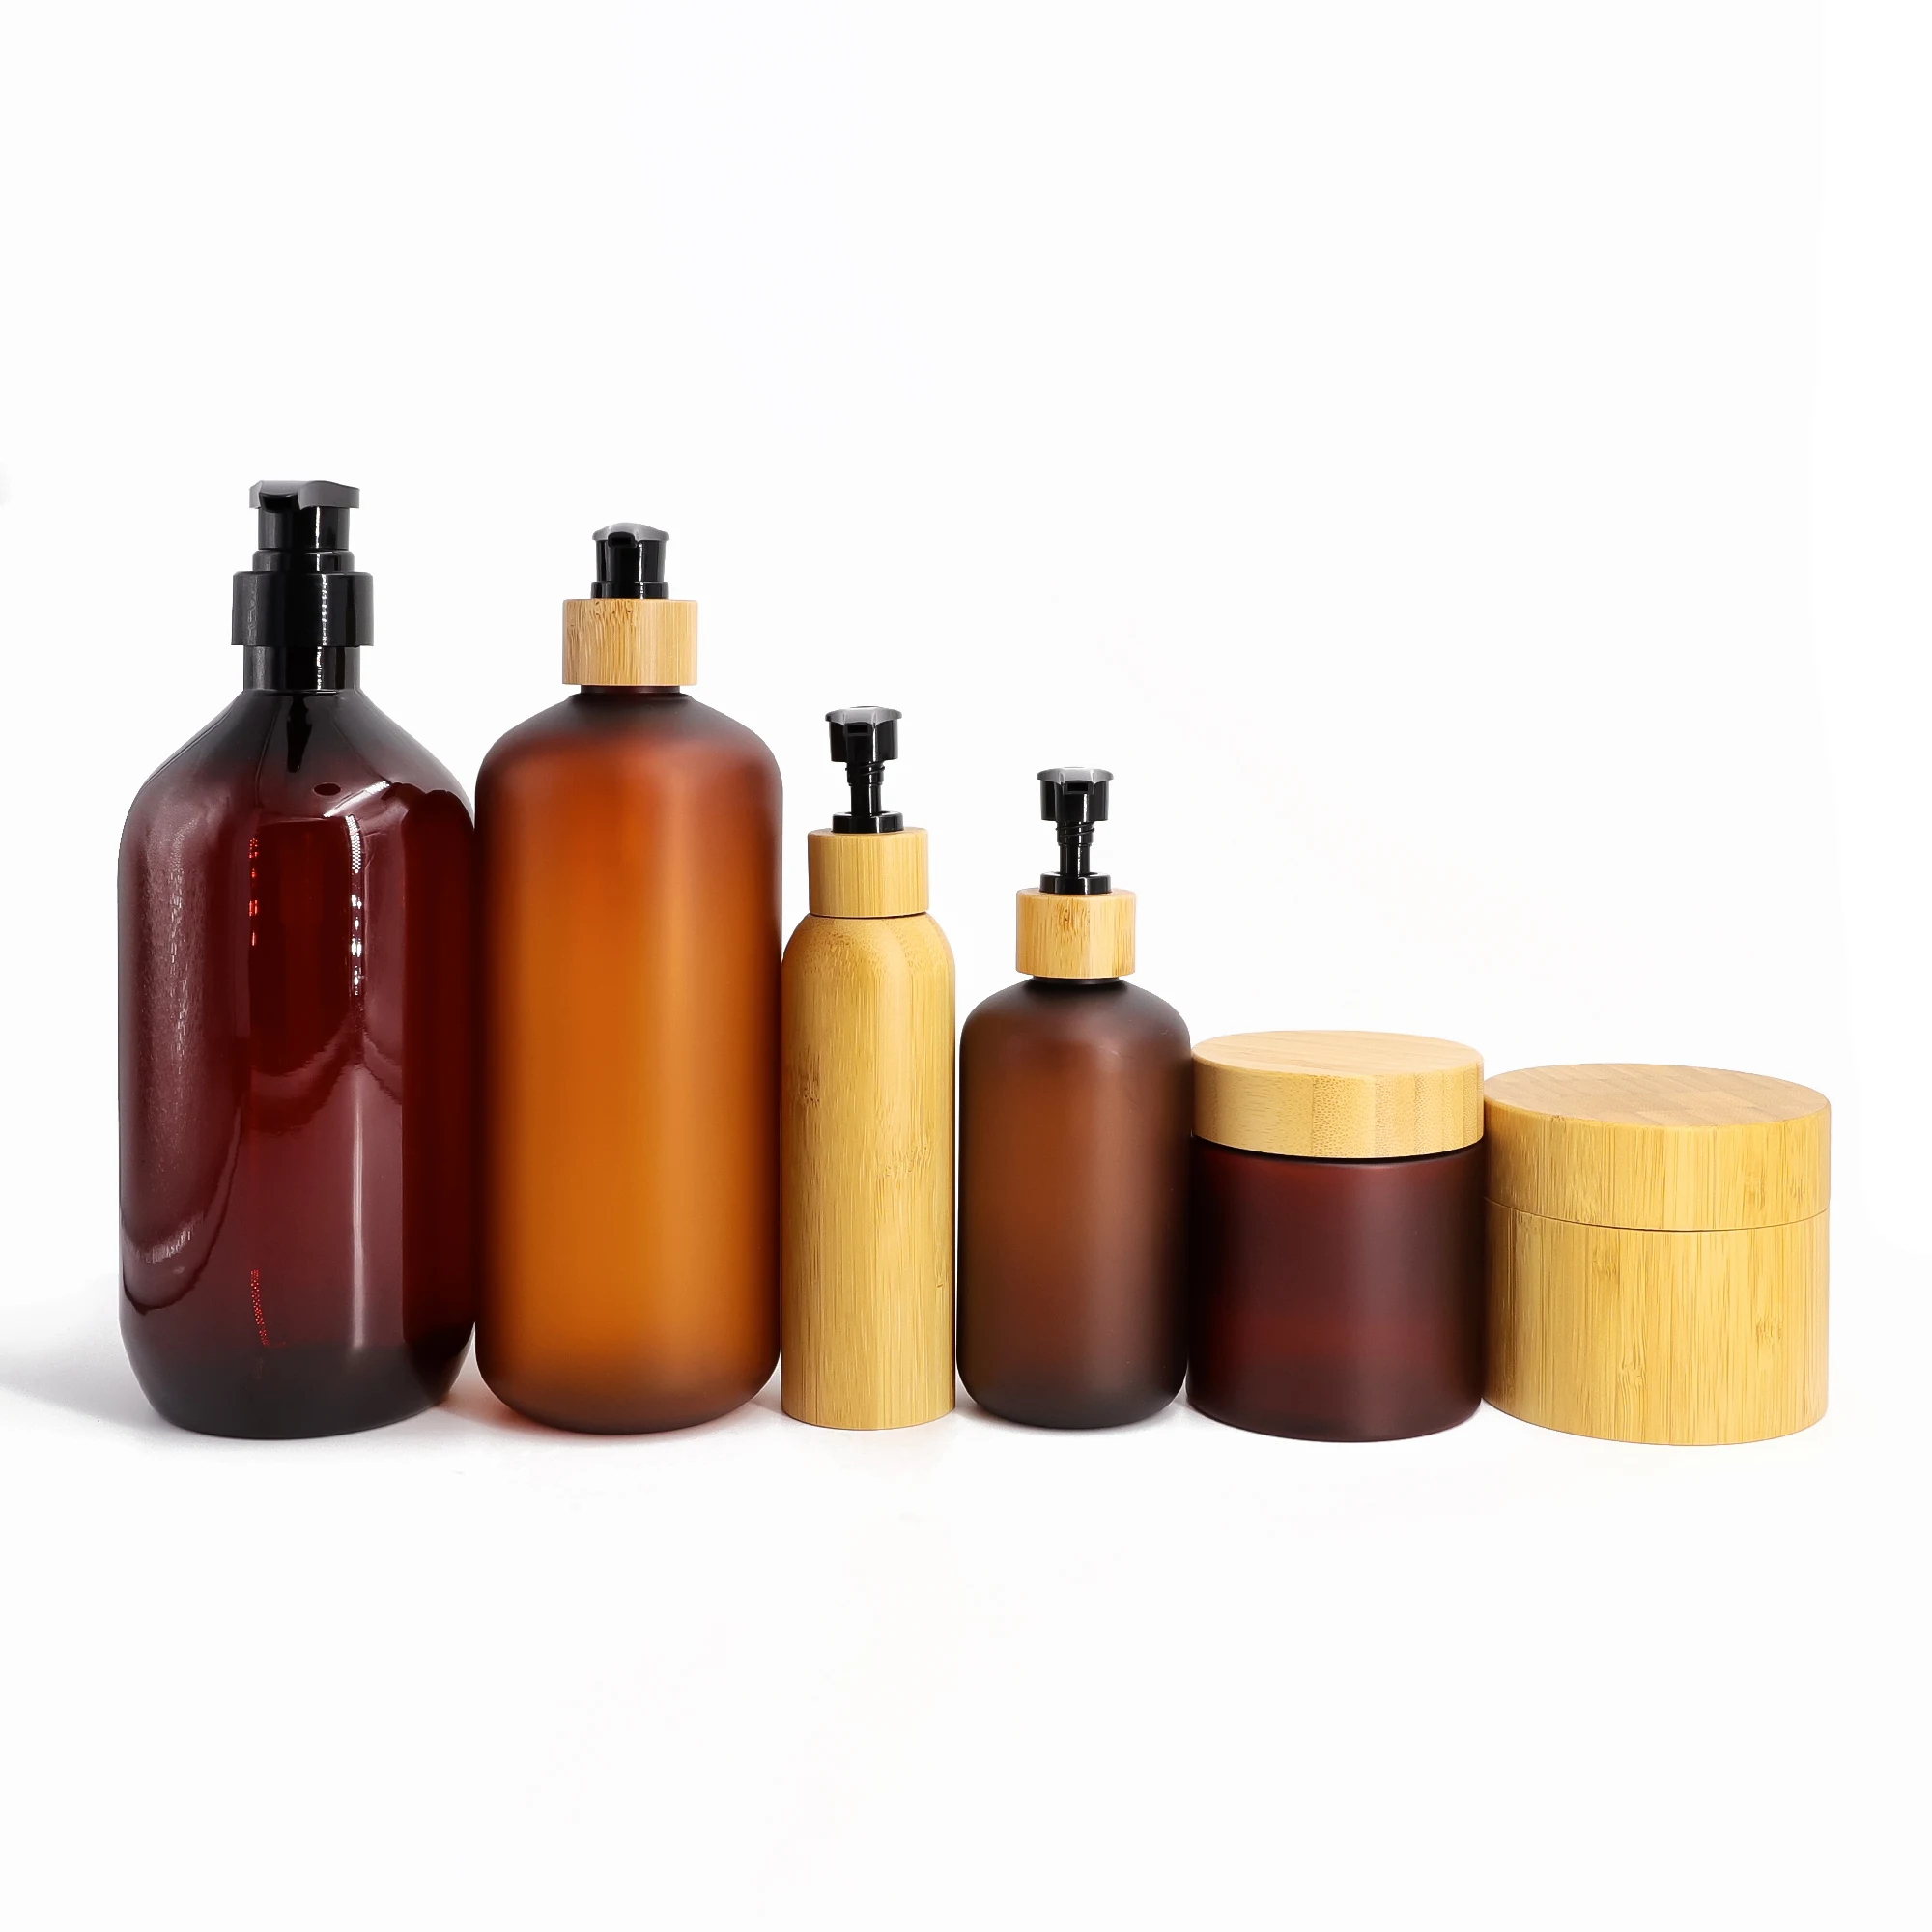 Empty Amber Plastic Bottles Jars ,Containers With Flip Cap For Shampoo, Lotions, Liquid Body Soap Packaging For Cosmetics